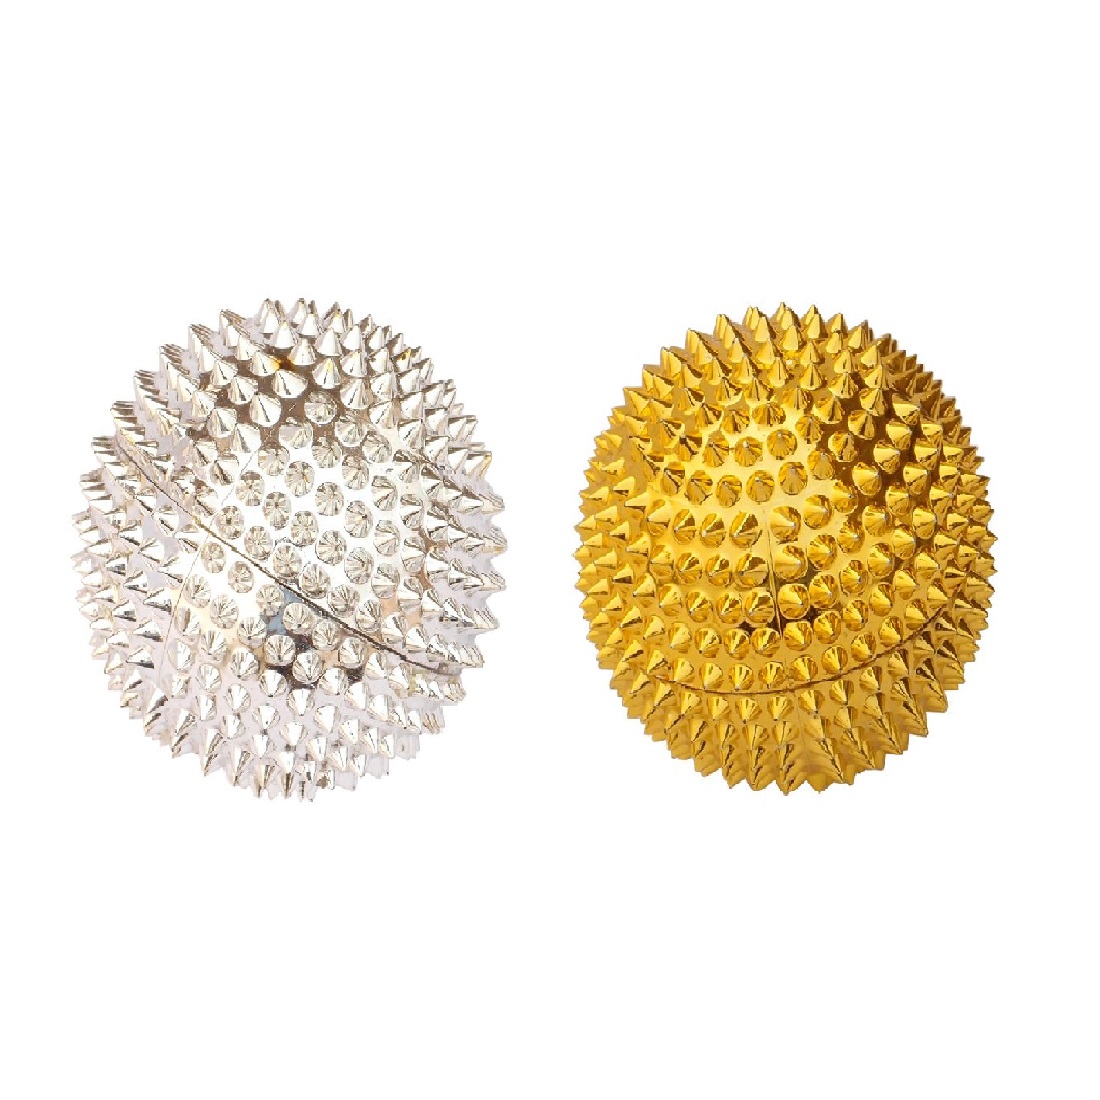 GHK H87 Acupressure Magnetic Needle Ball Massager(Pack of 2,Golden-Silver)